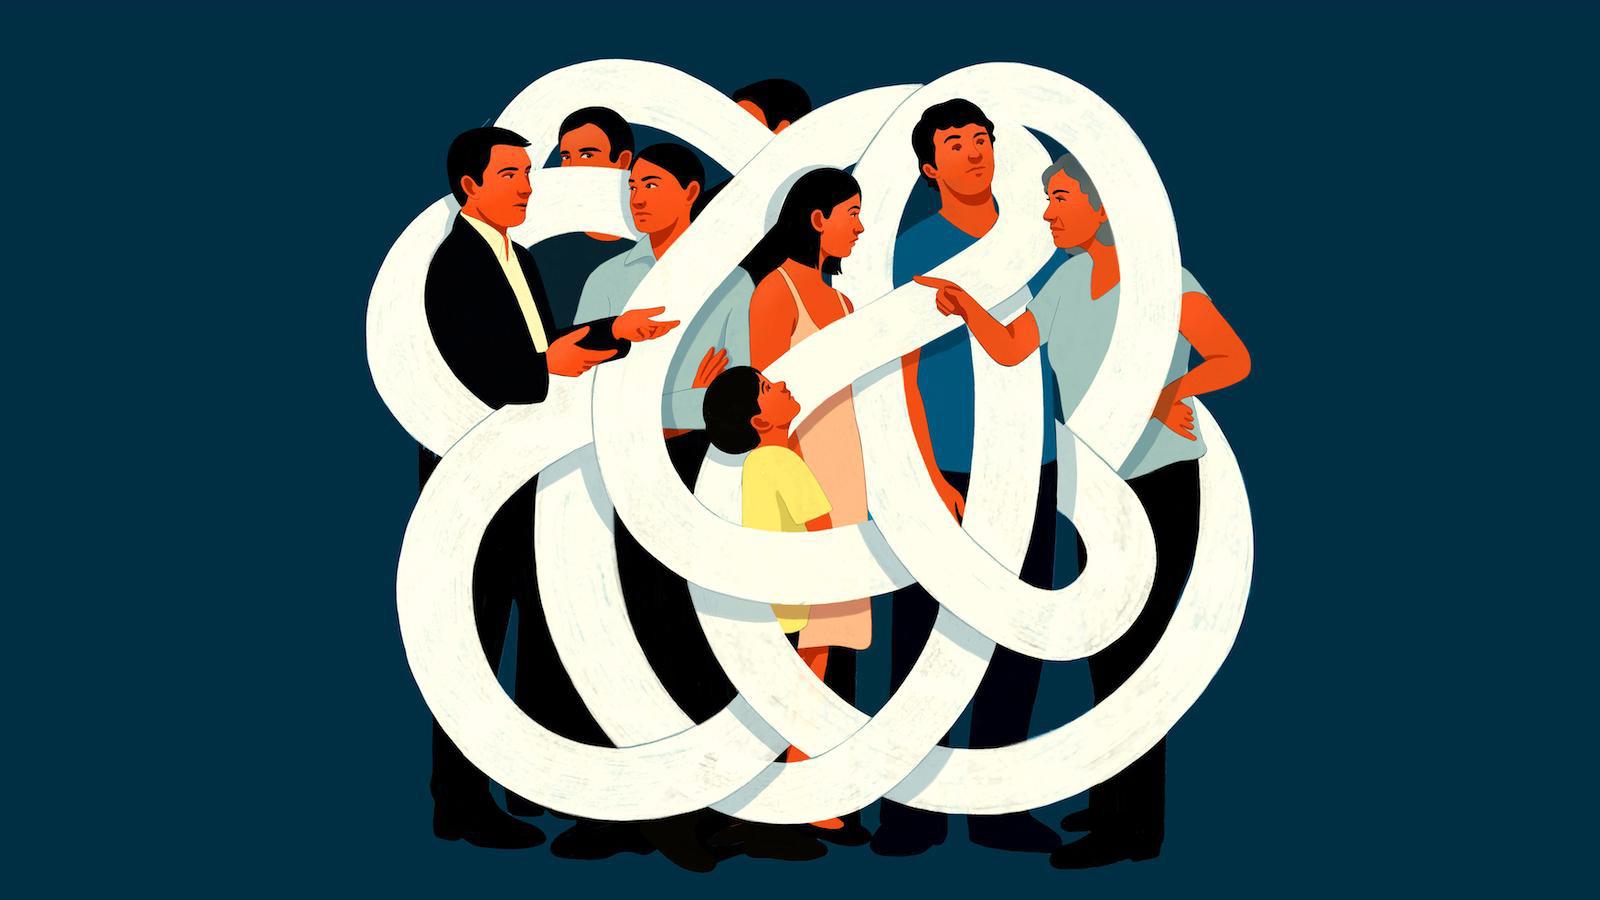 Illustration of a family in conversation, intertwined with a maze-like white rope. By Anna Parini.